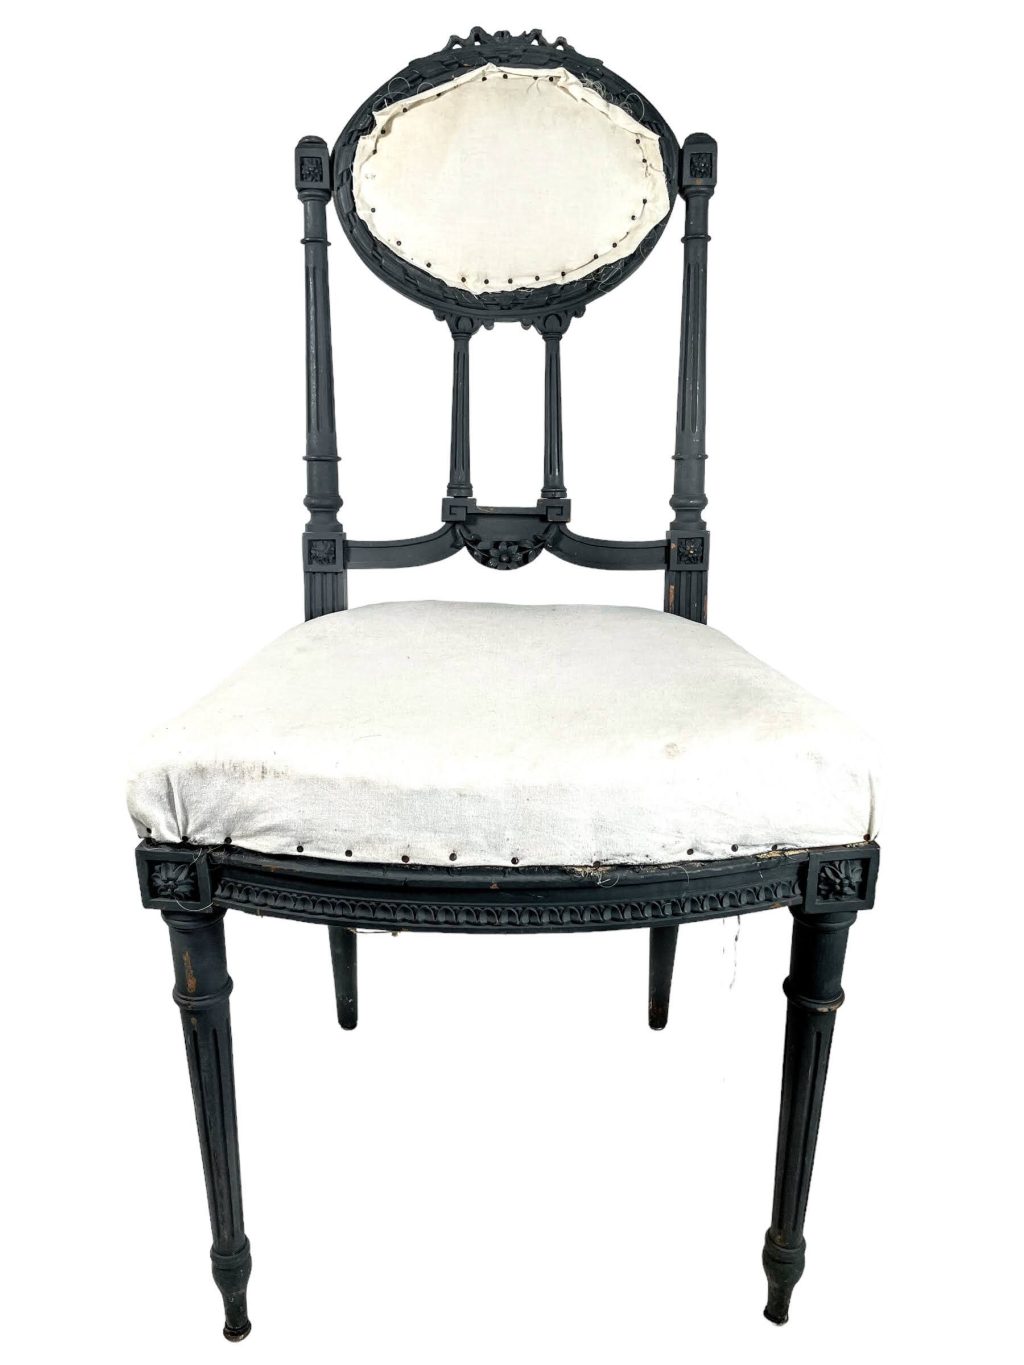 Antique French Regency Styled Partly Refurbished Cushioned Chair Wooden Awaiting Upholstery Rest Seating c1910-20’s